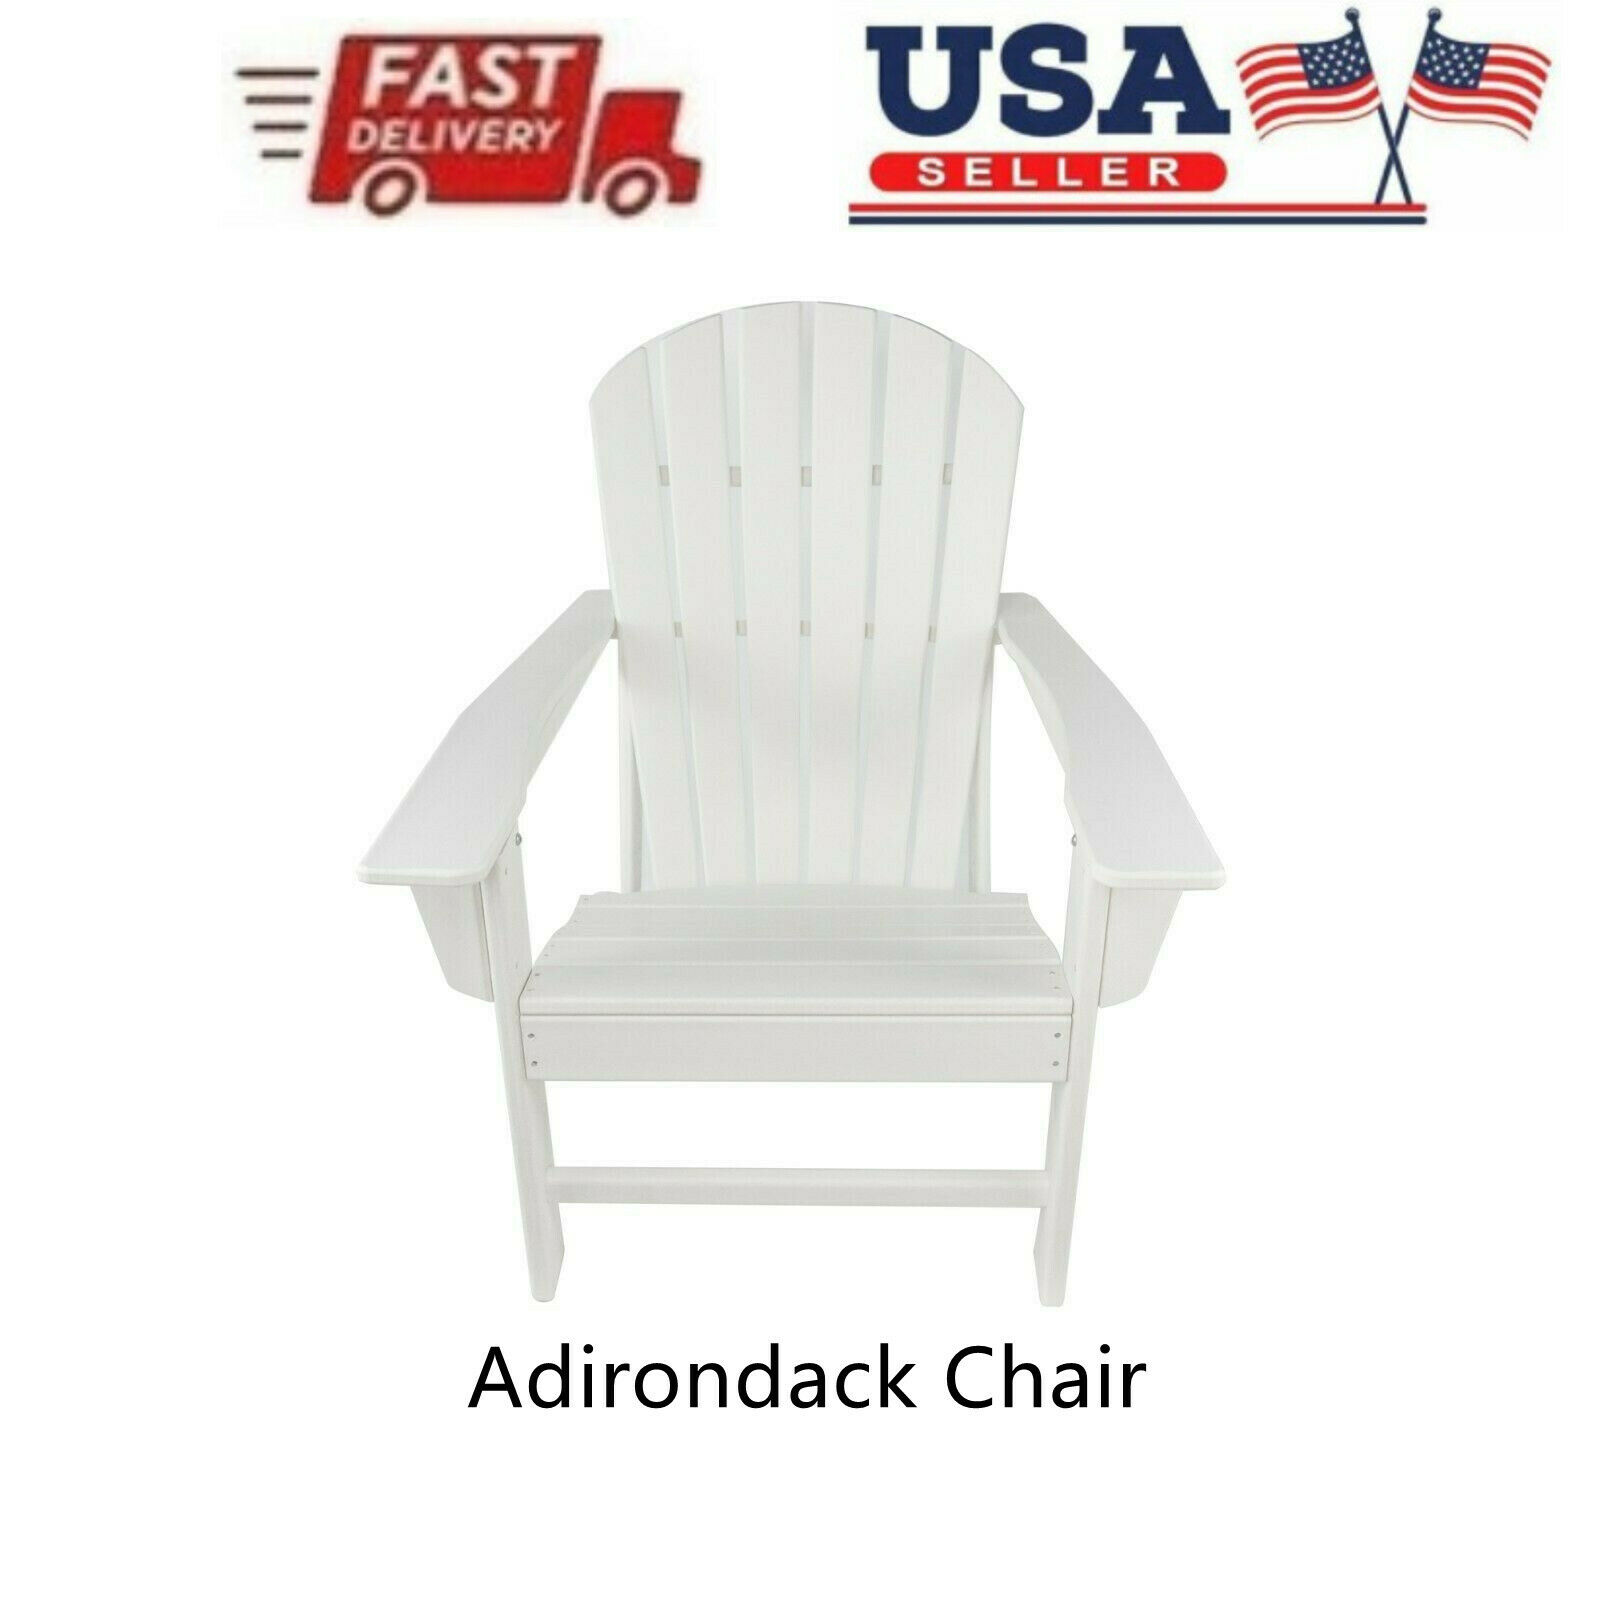 Adirondack Chair Resin, 350 lbs Capacity Load,Patio Chair Lawn Chair Outdoor Adirondack Chairs Weather Resistant for Patio Deck Garden 33.07*31.1*36.4" HDPE Resin Wood,White - image 2 of 9